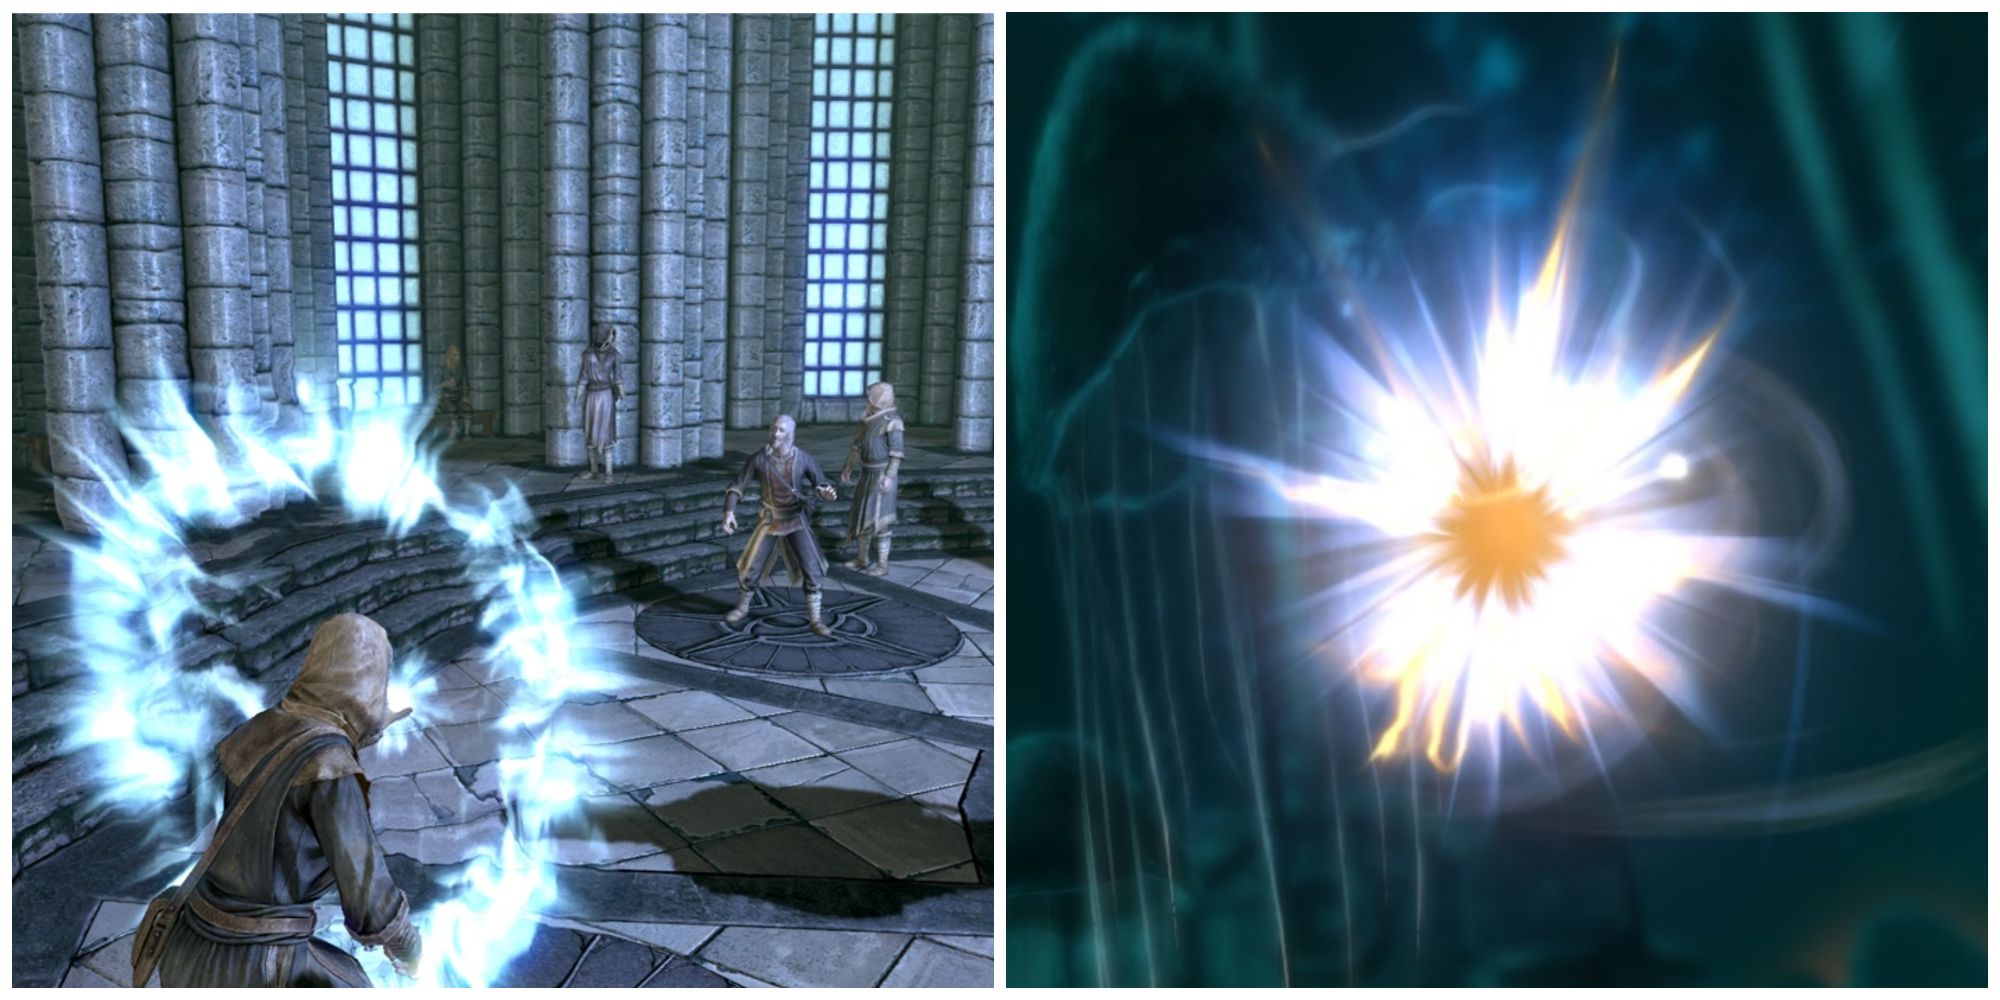 Skyrim split image of mage using ward spell in First Lessons, and Restoration spell in inventory